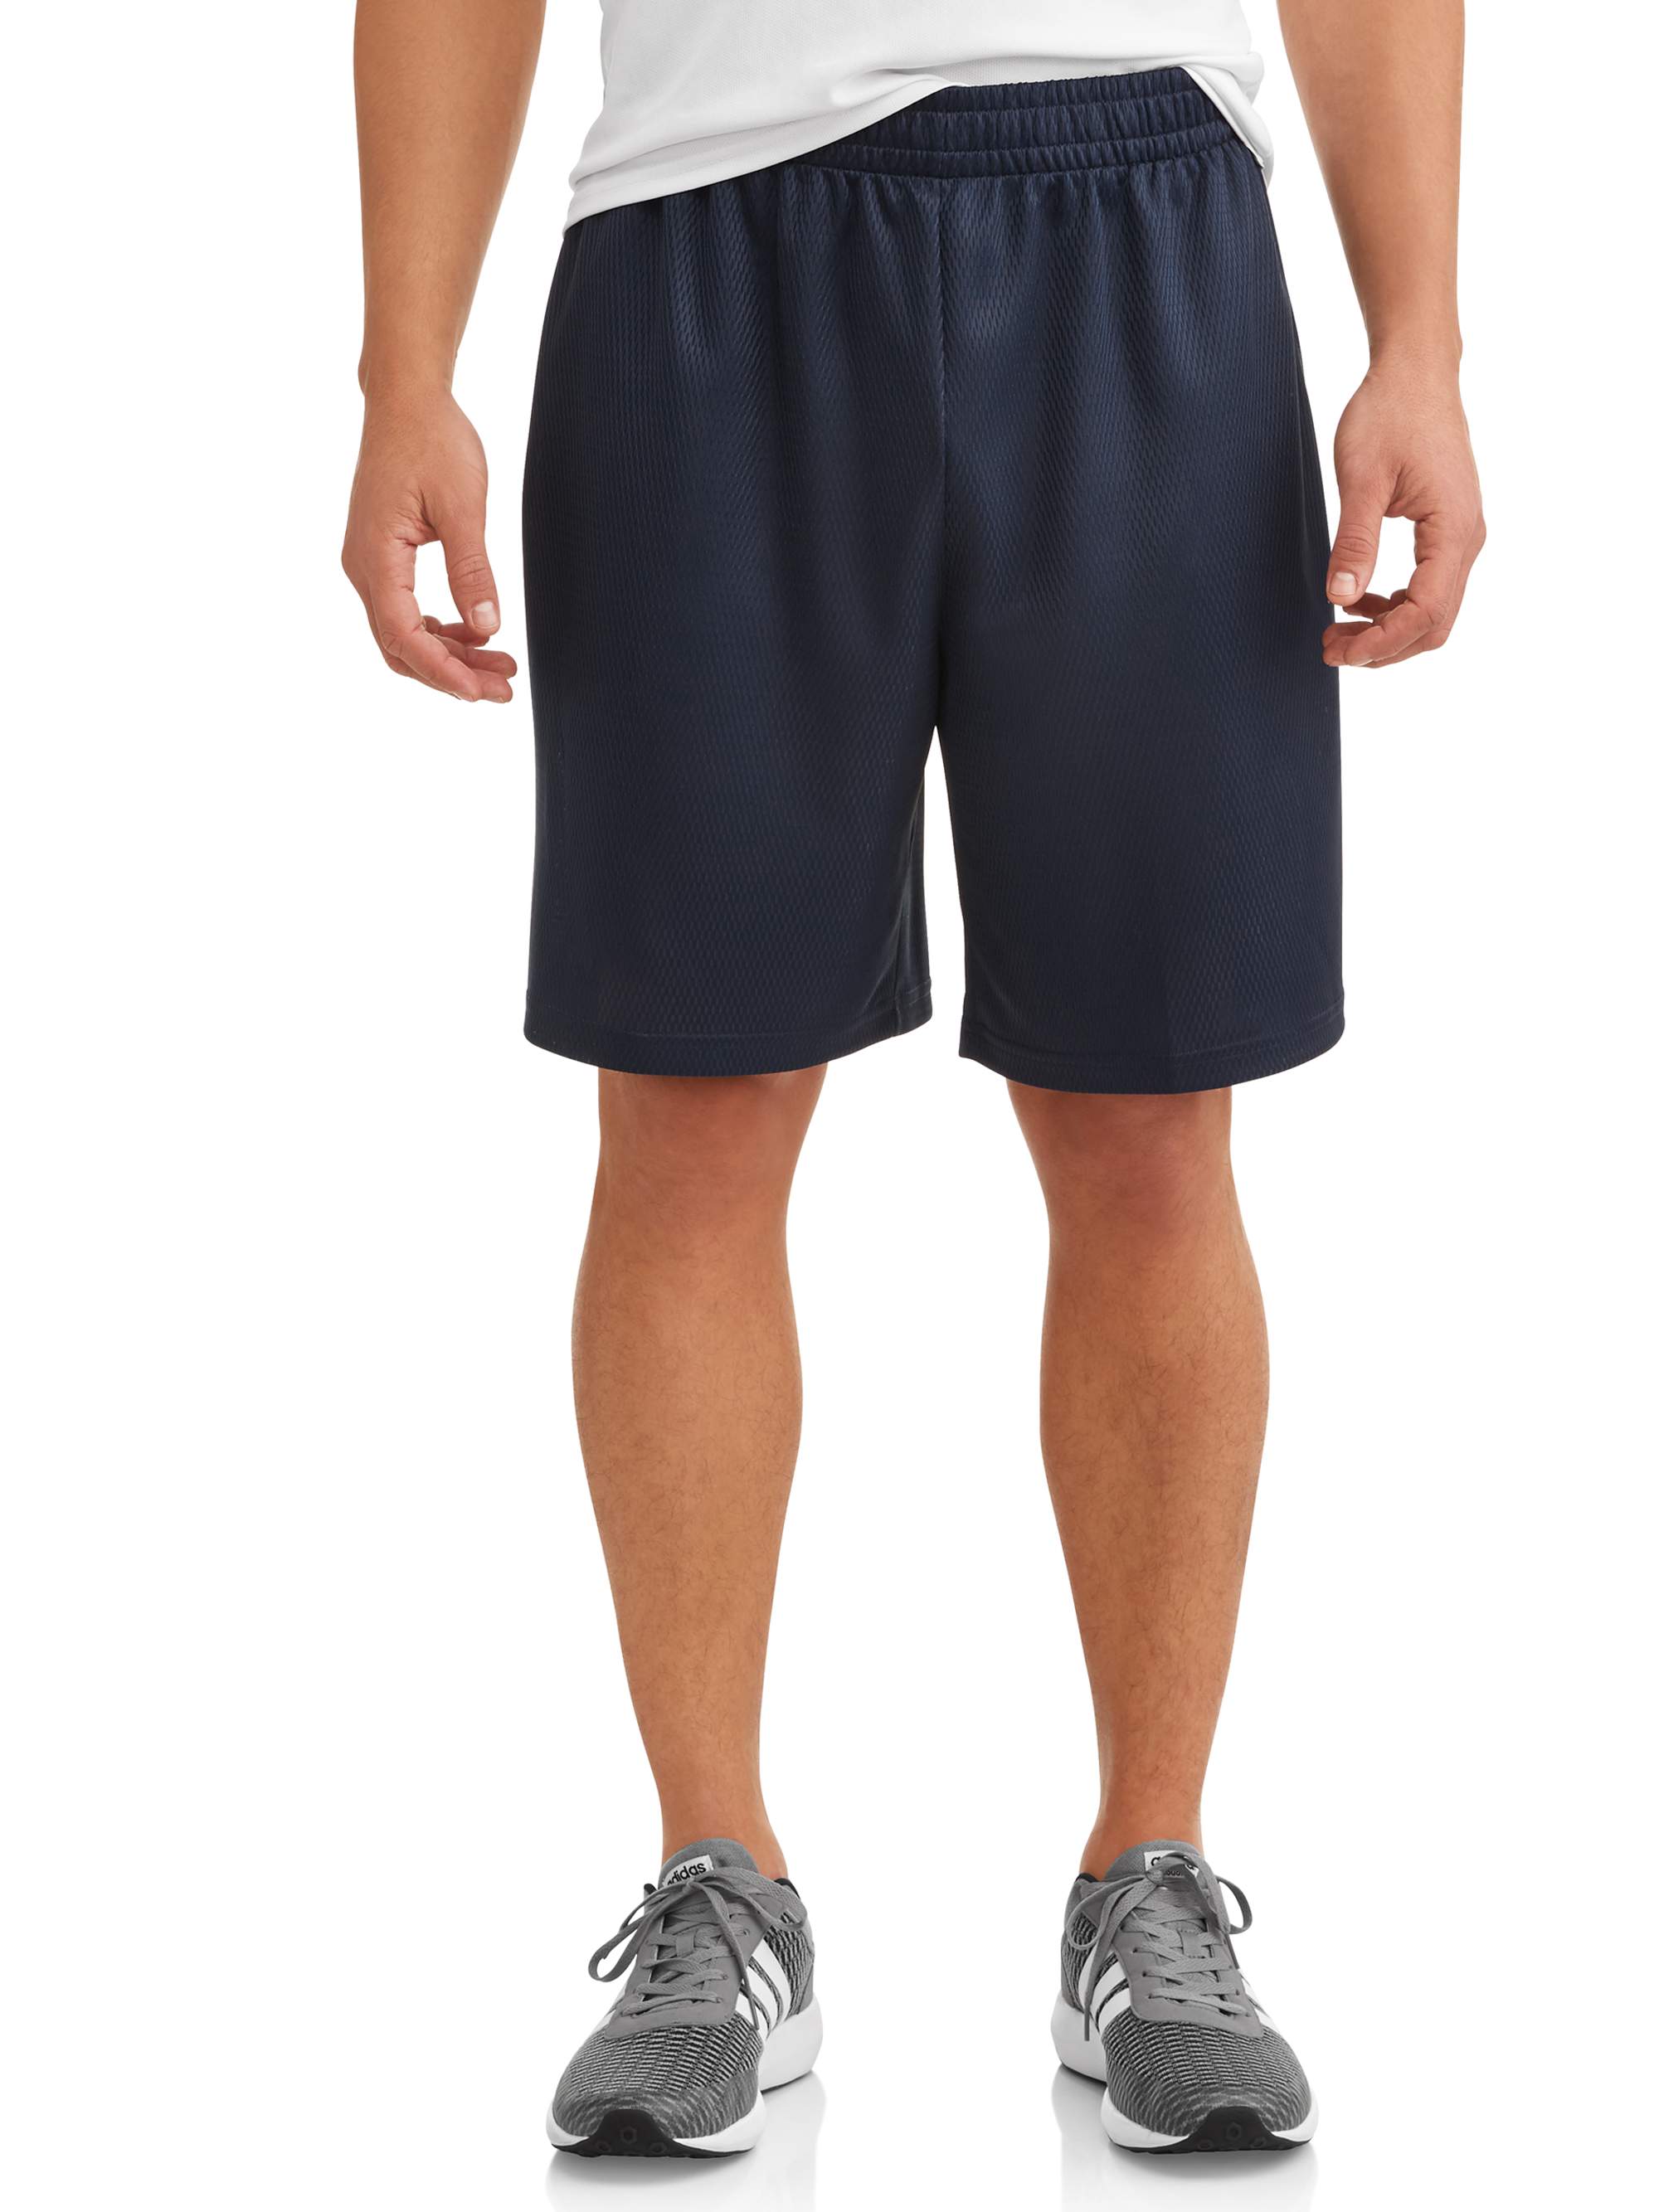 Athletic Works Men's and Big Men's 9" Dazzle Short, Up to 5XL - image 1 of 4